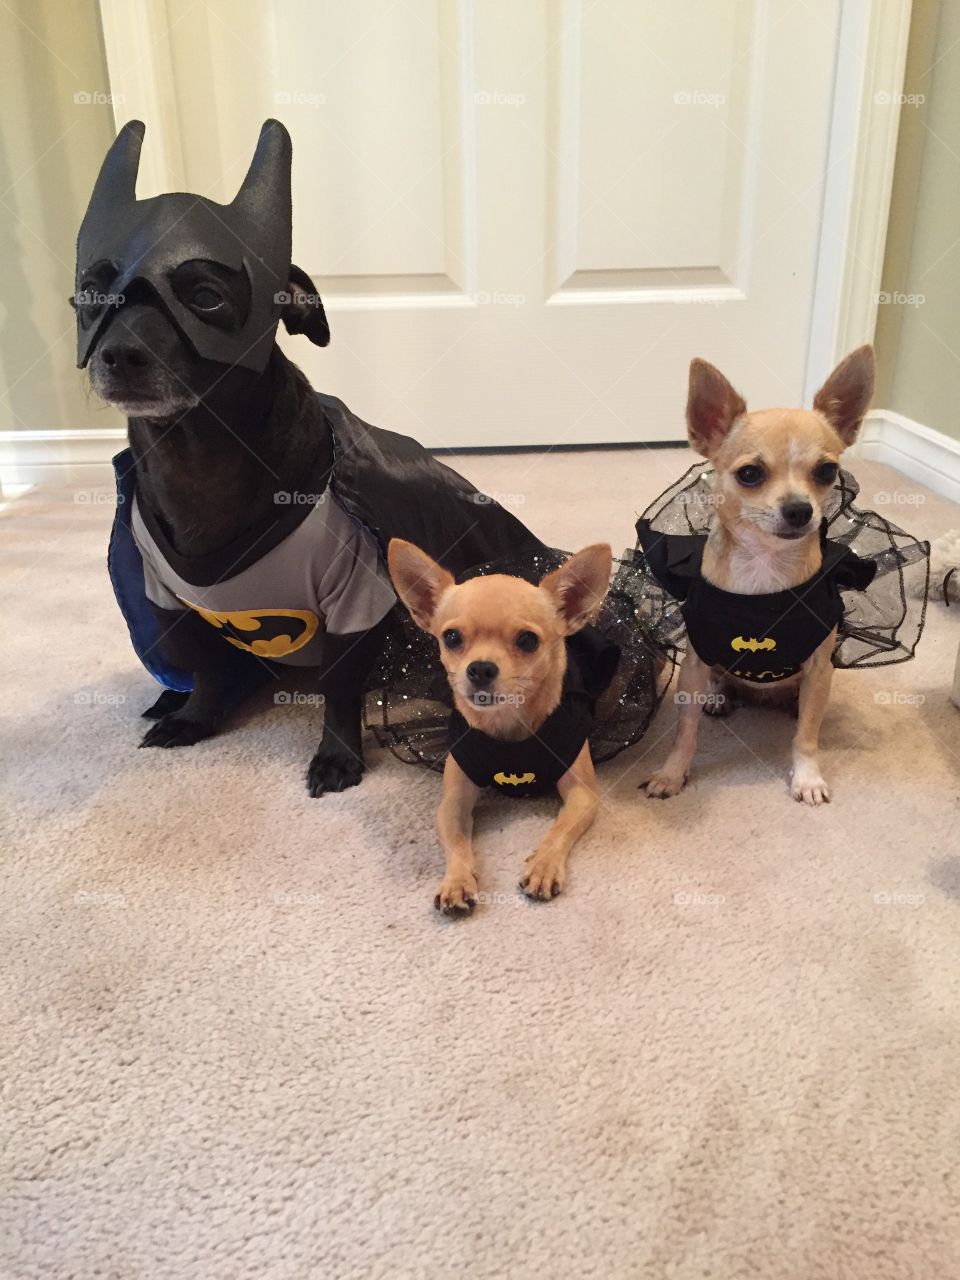 We are here to save the day! 